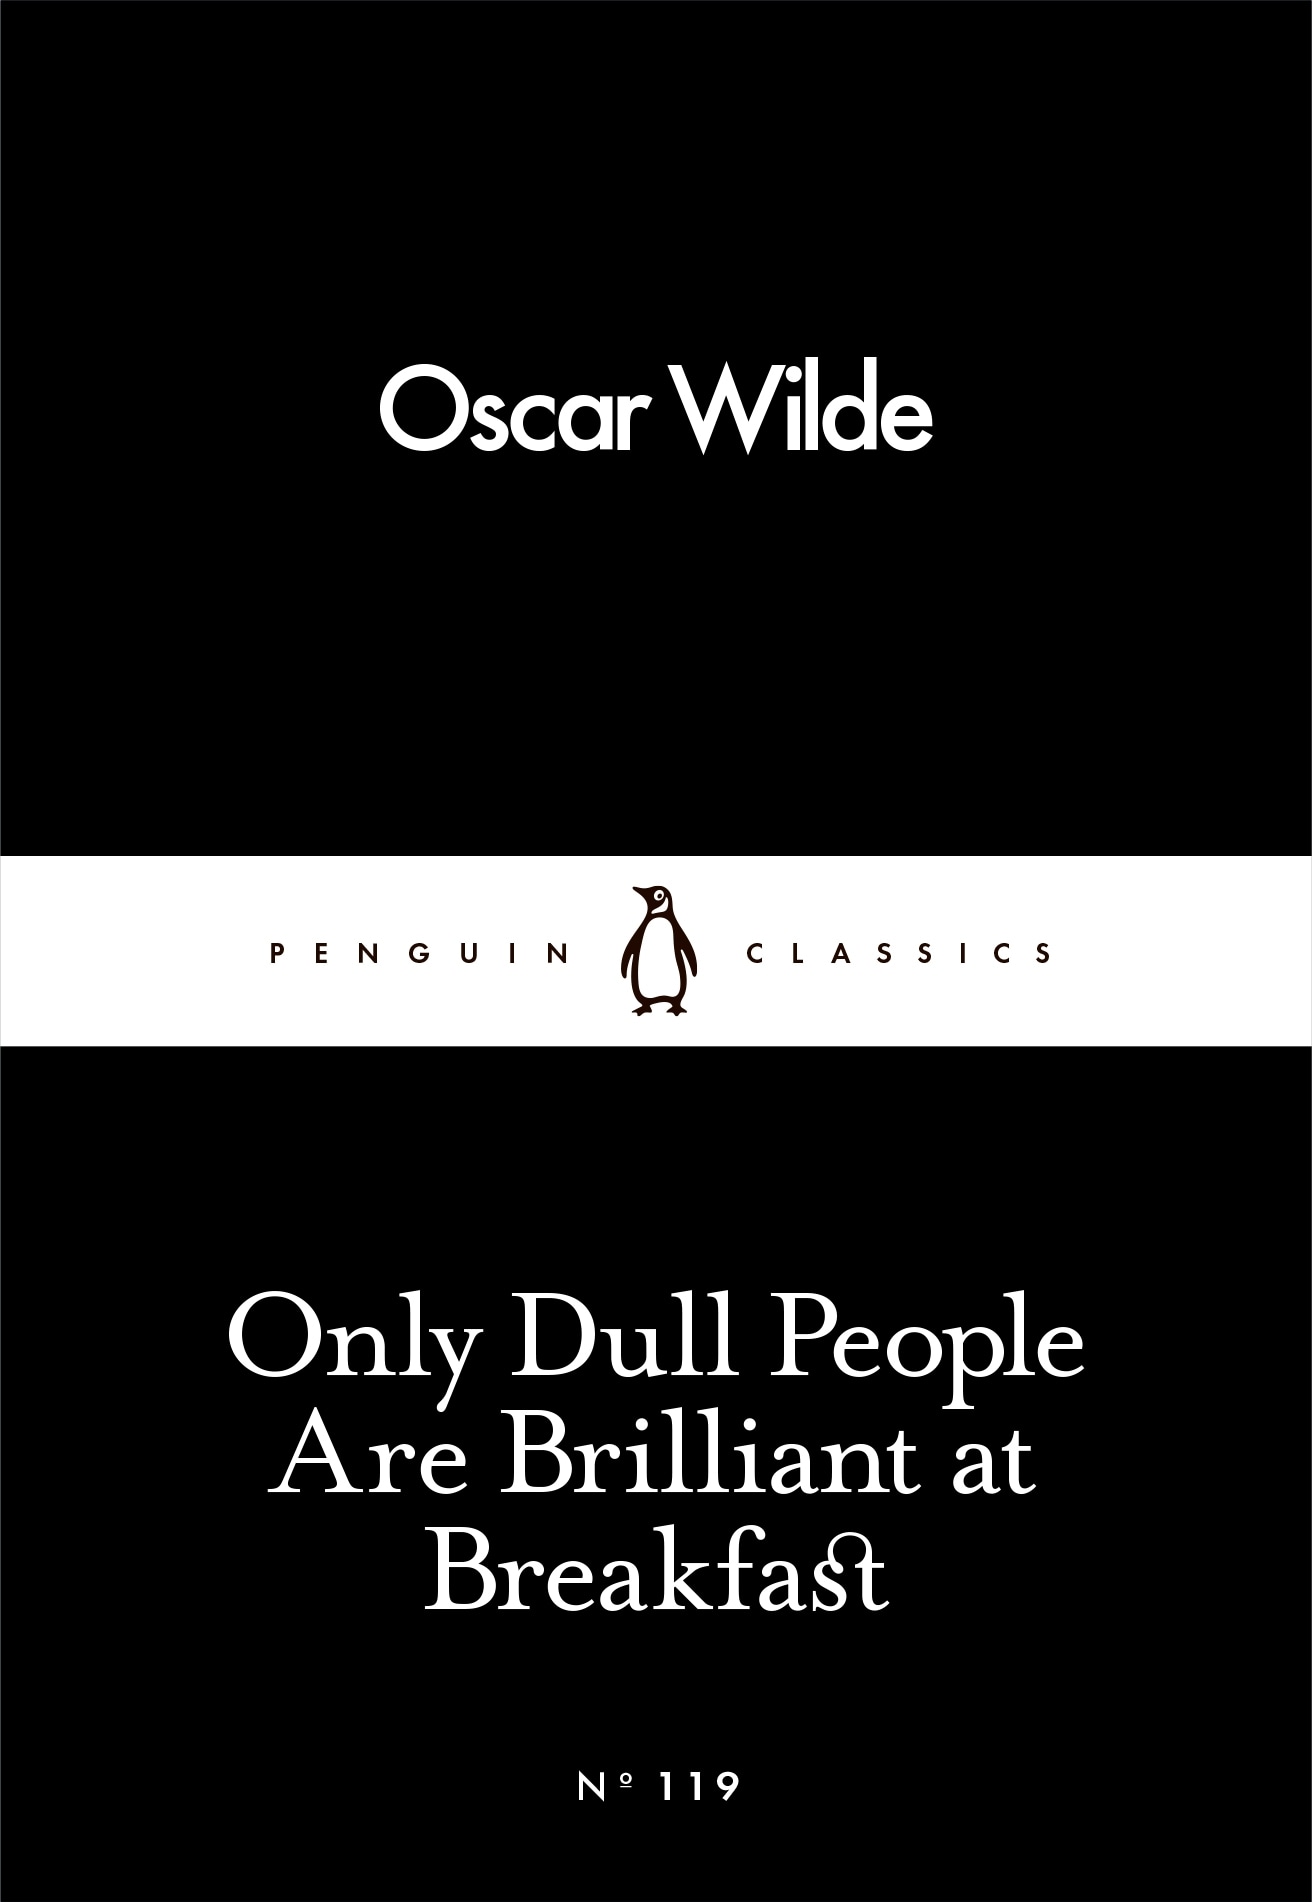 Book “Only Dull People Are Brilliant at Breakfast” by Oscar Wilde — March 3, 2016